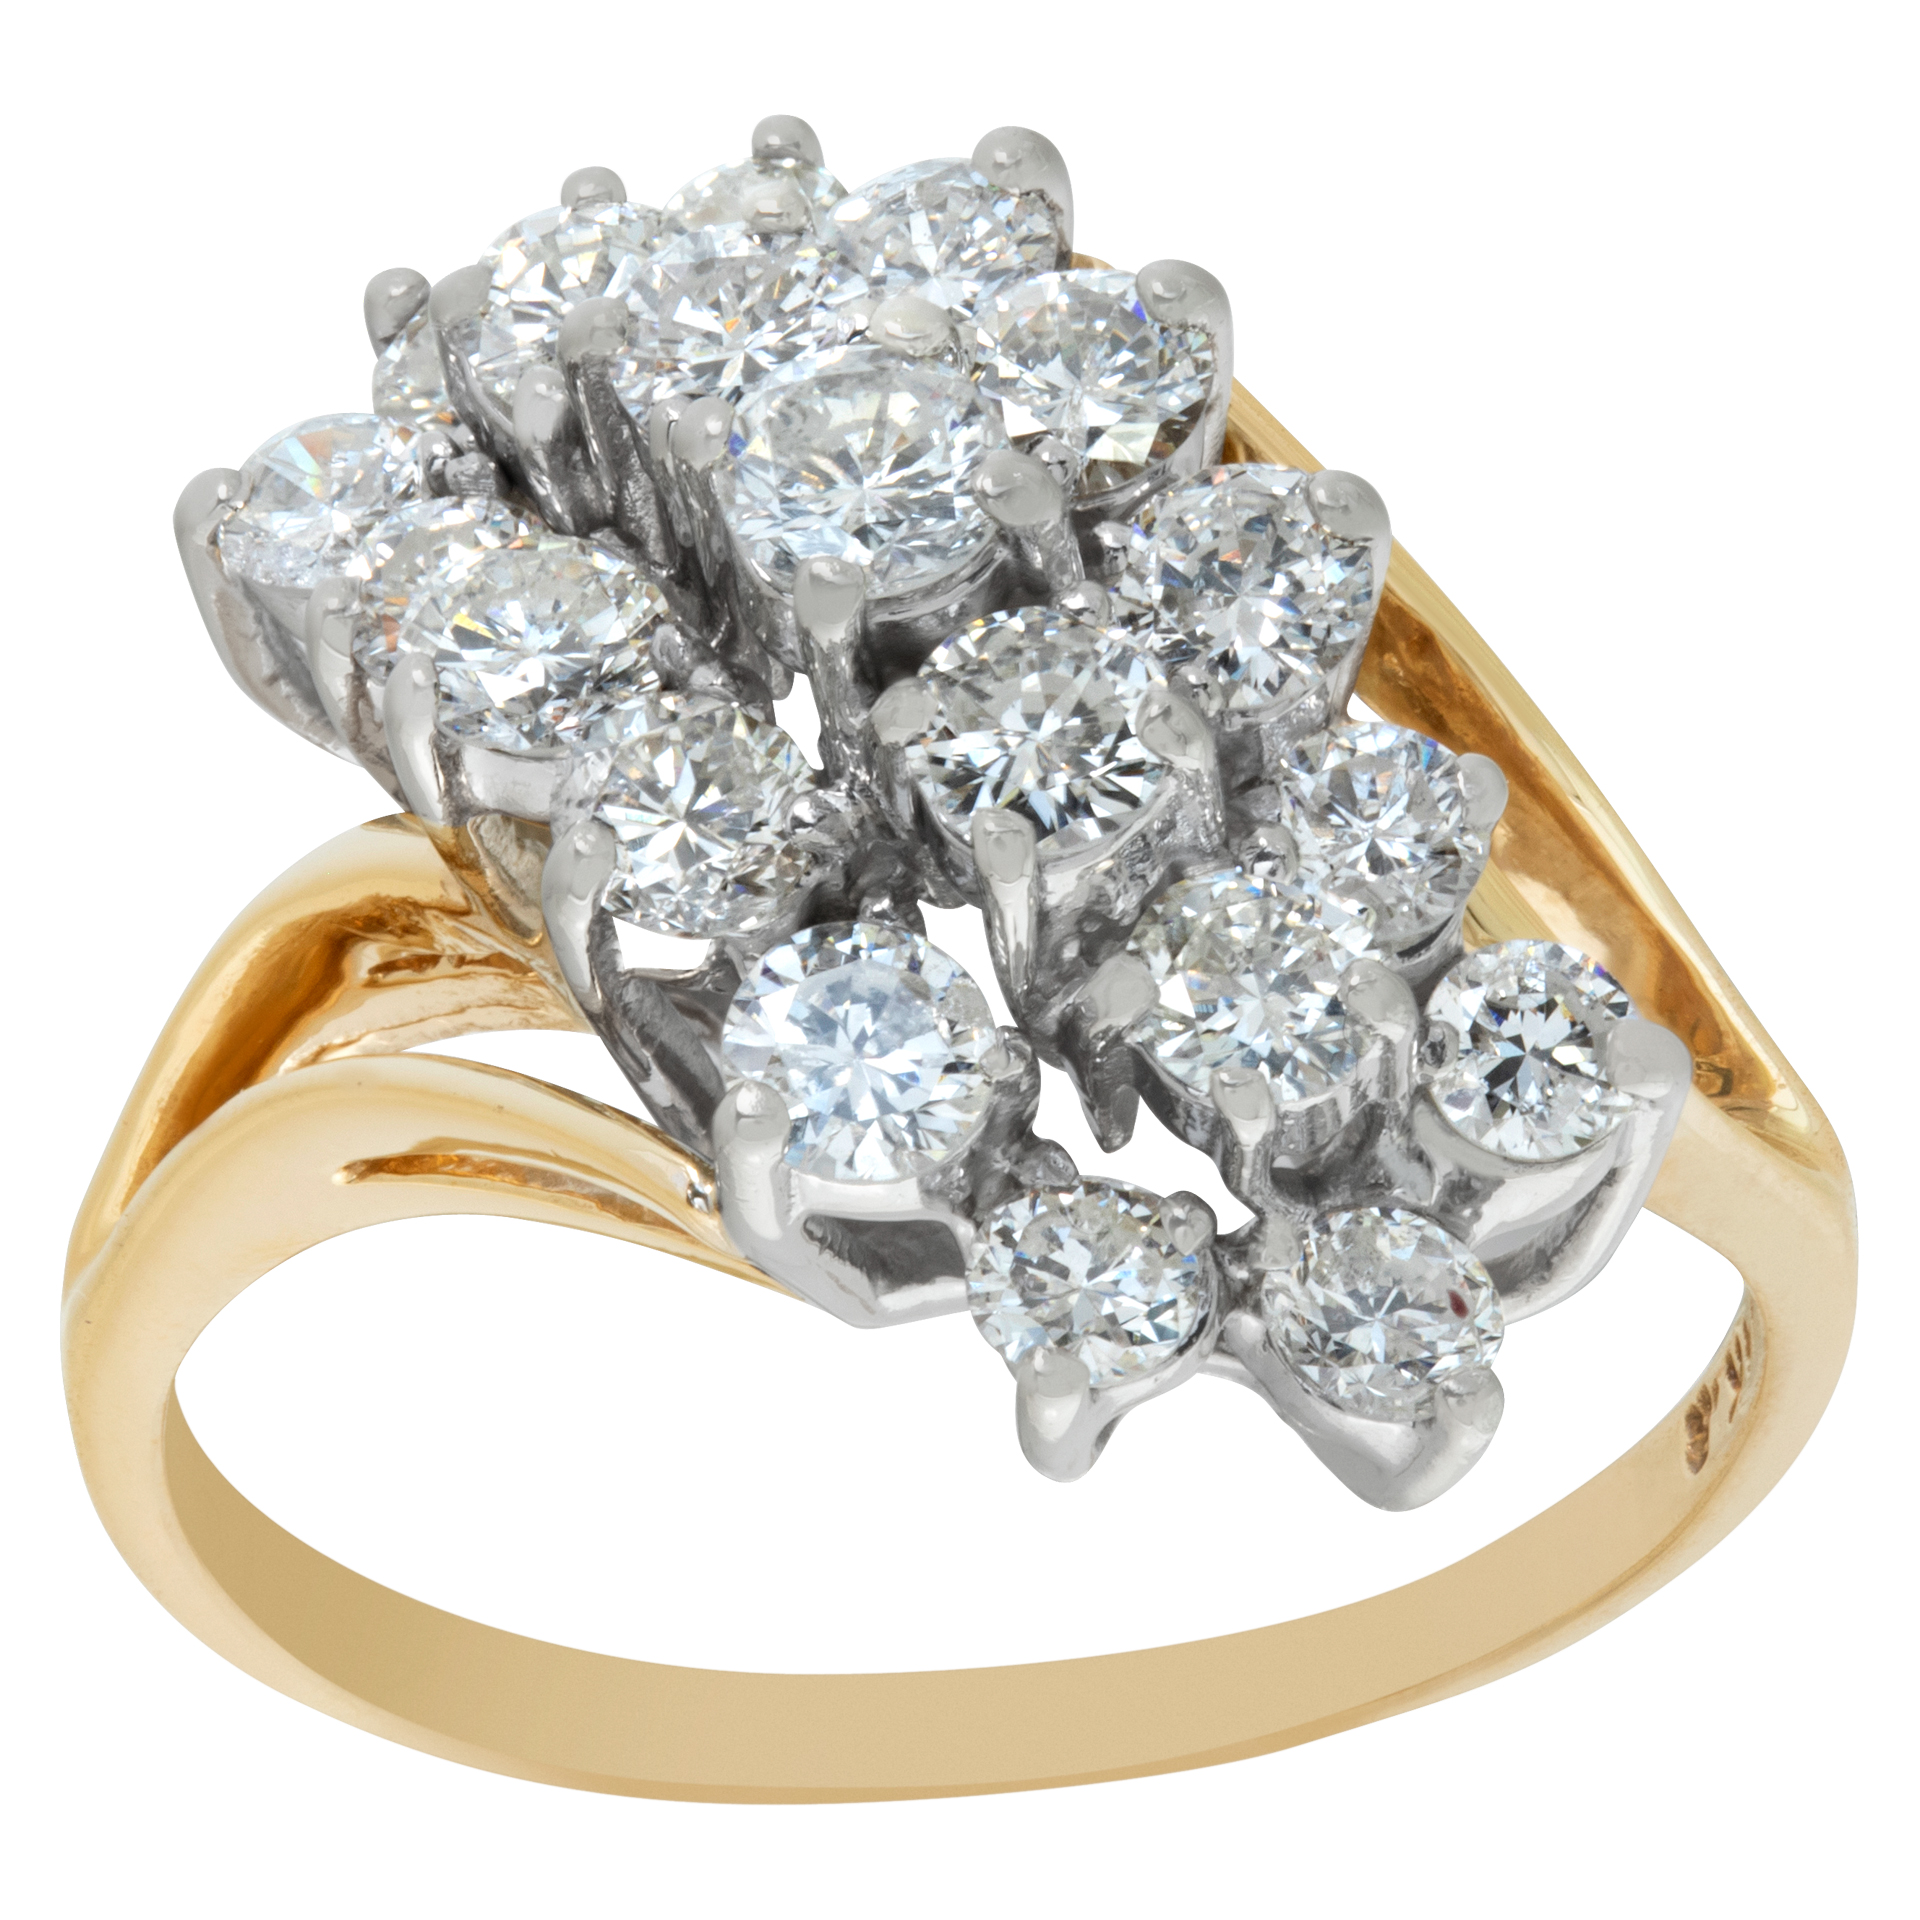 Diamond ring in 14k white and yellow gold image 1